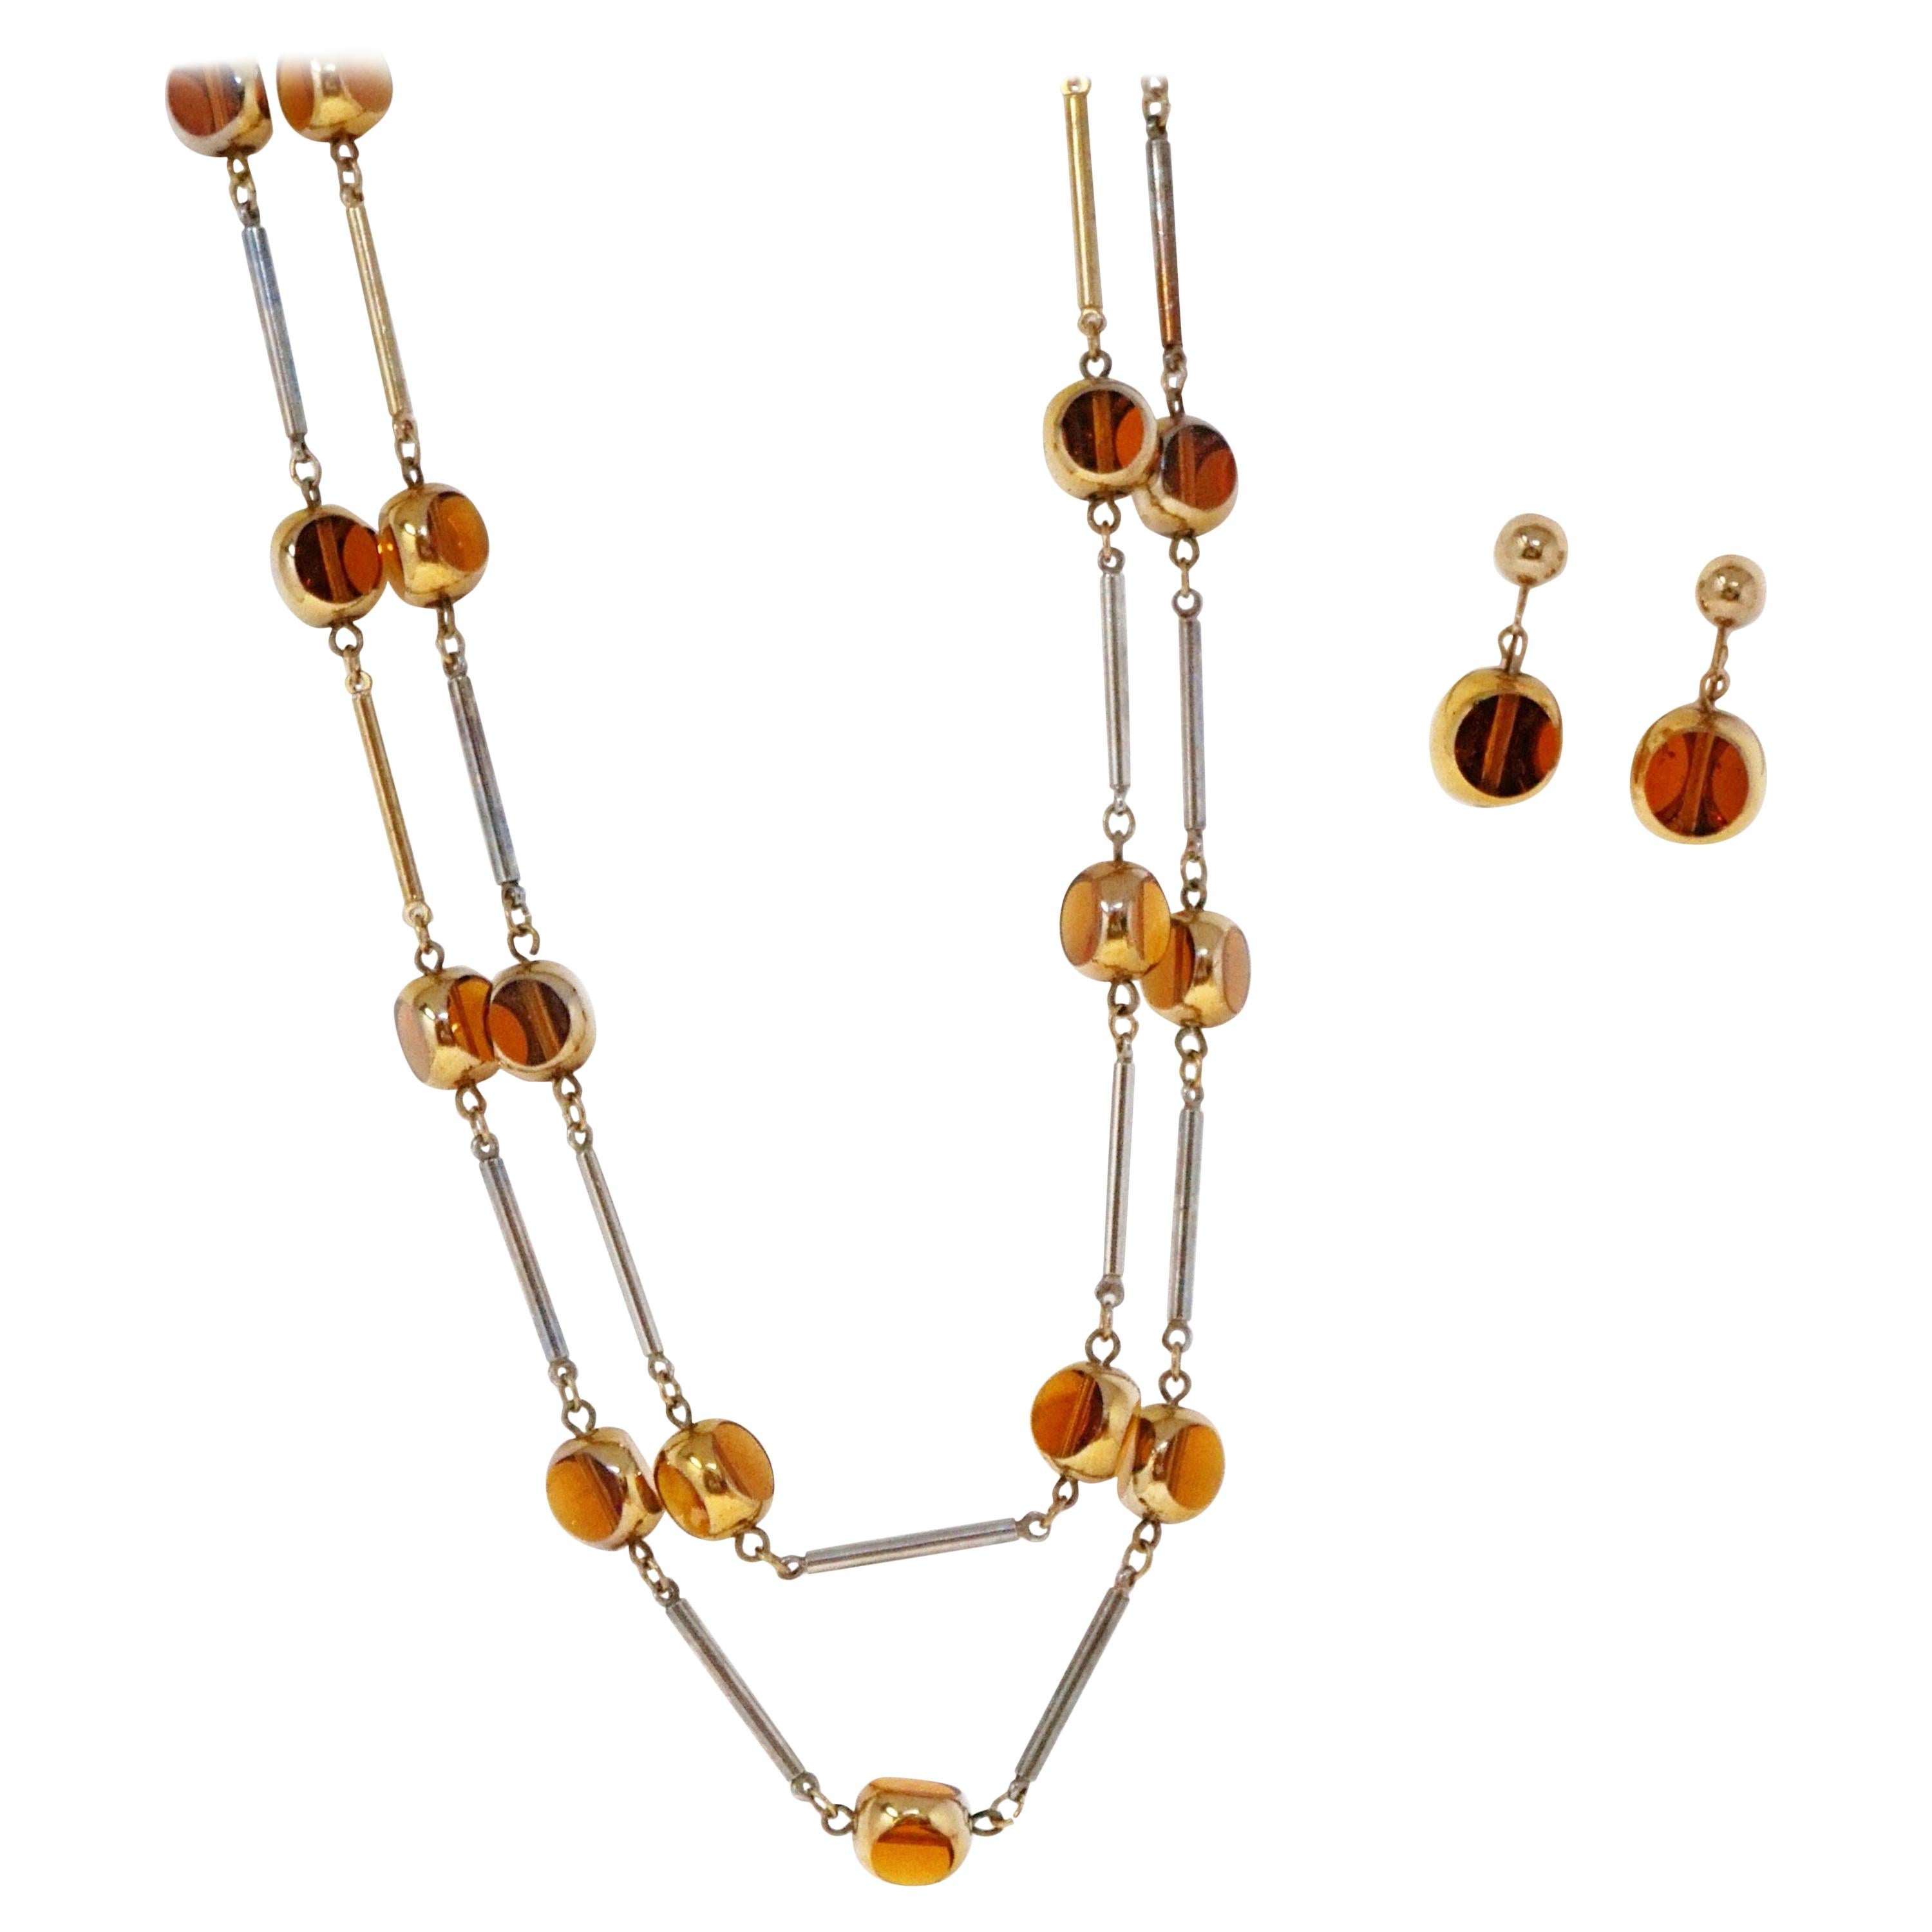 Gilded and Smoked Glass Necklace and Earring Demi-Parure Set by Bergère, 1970s